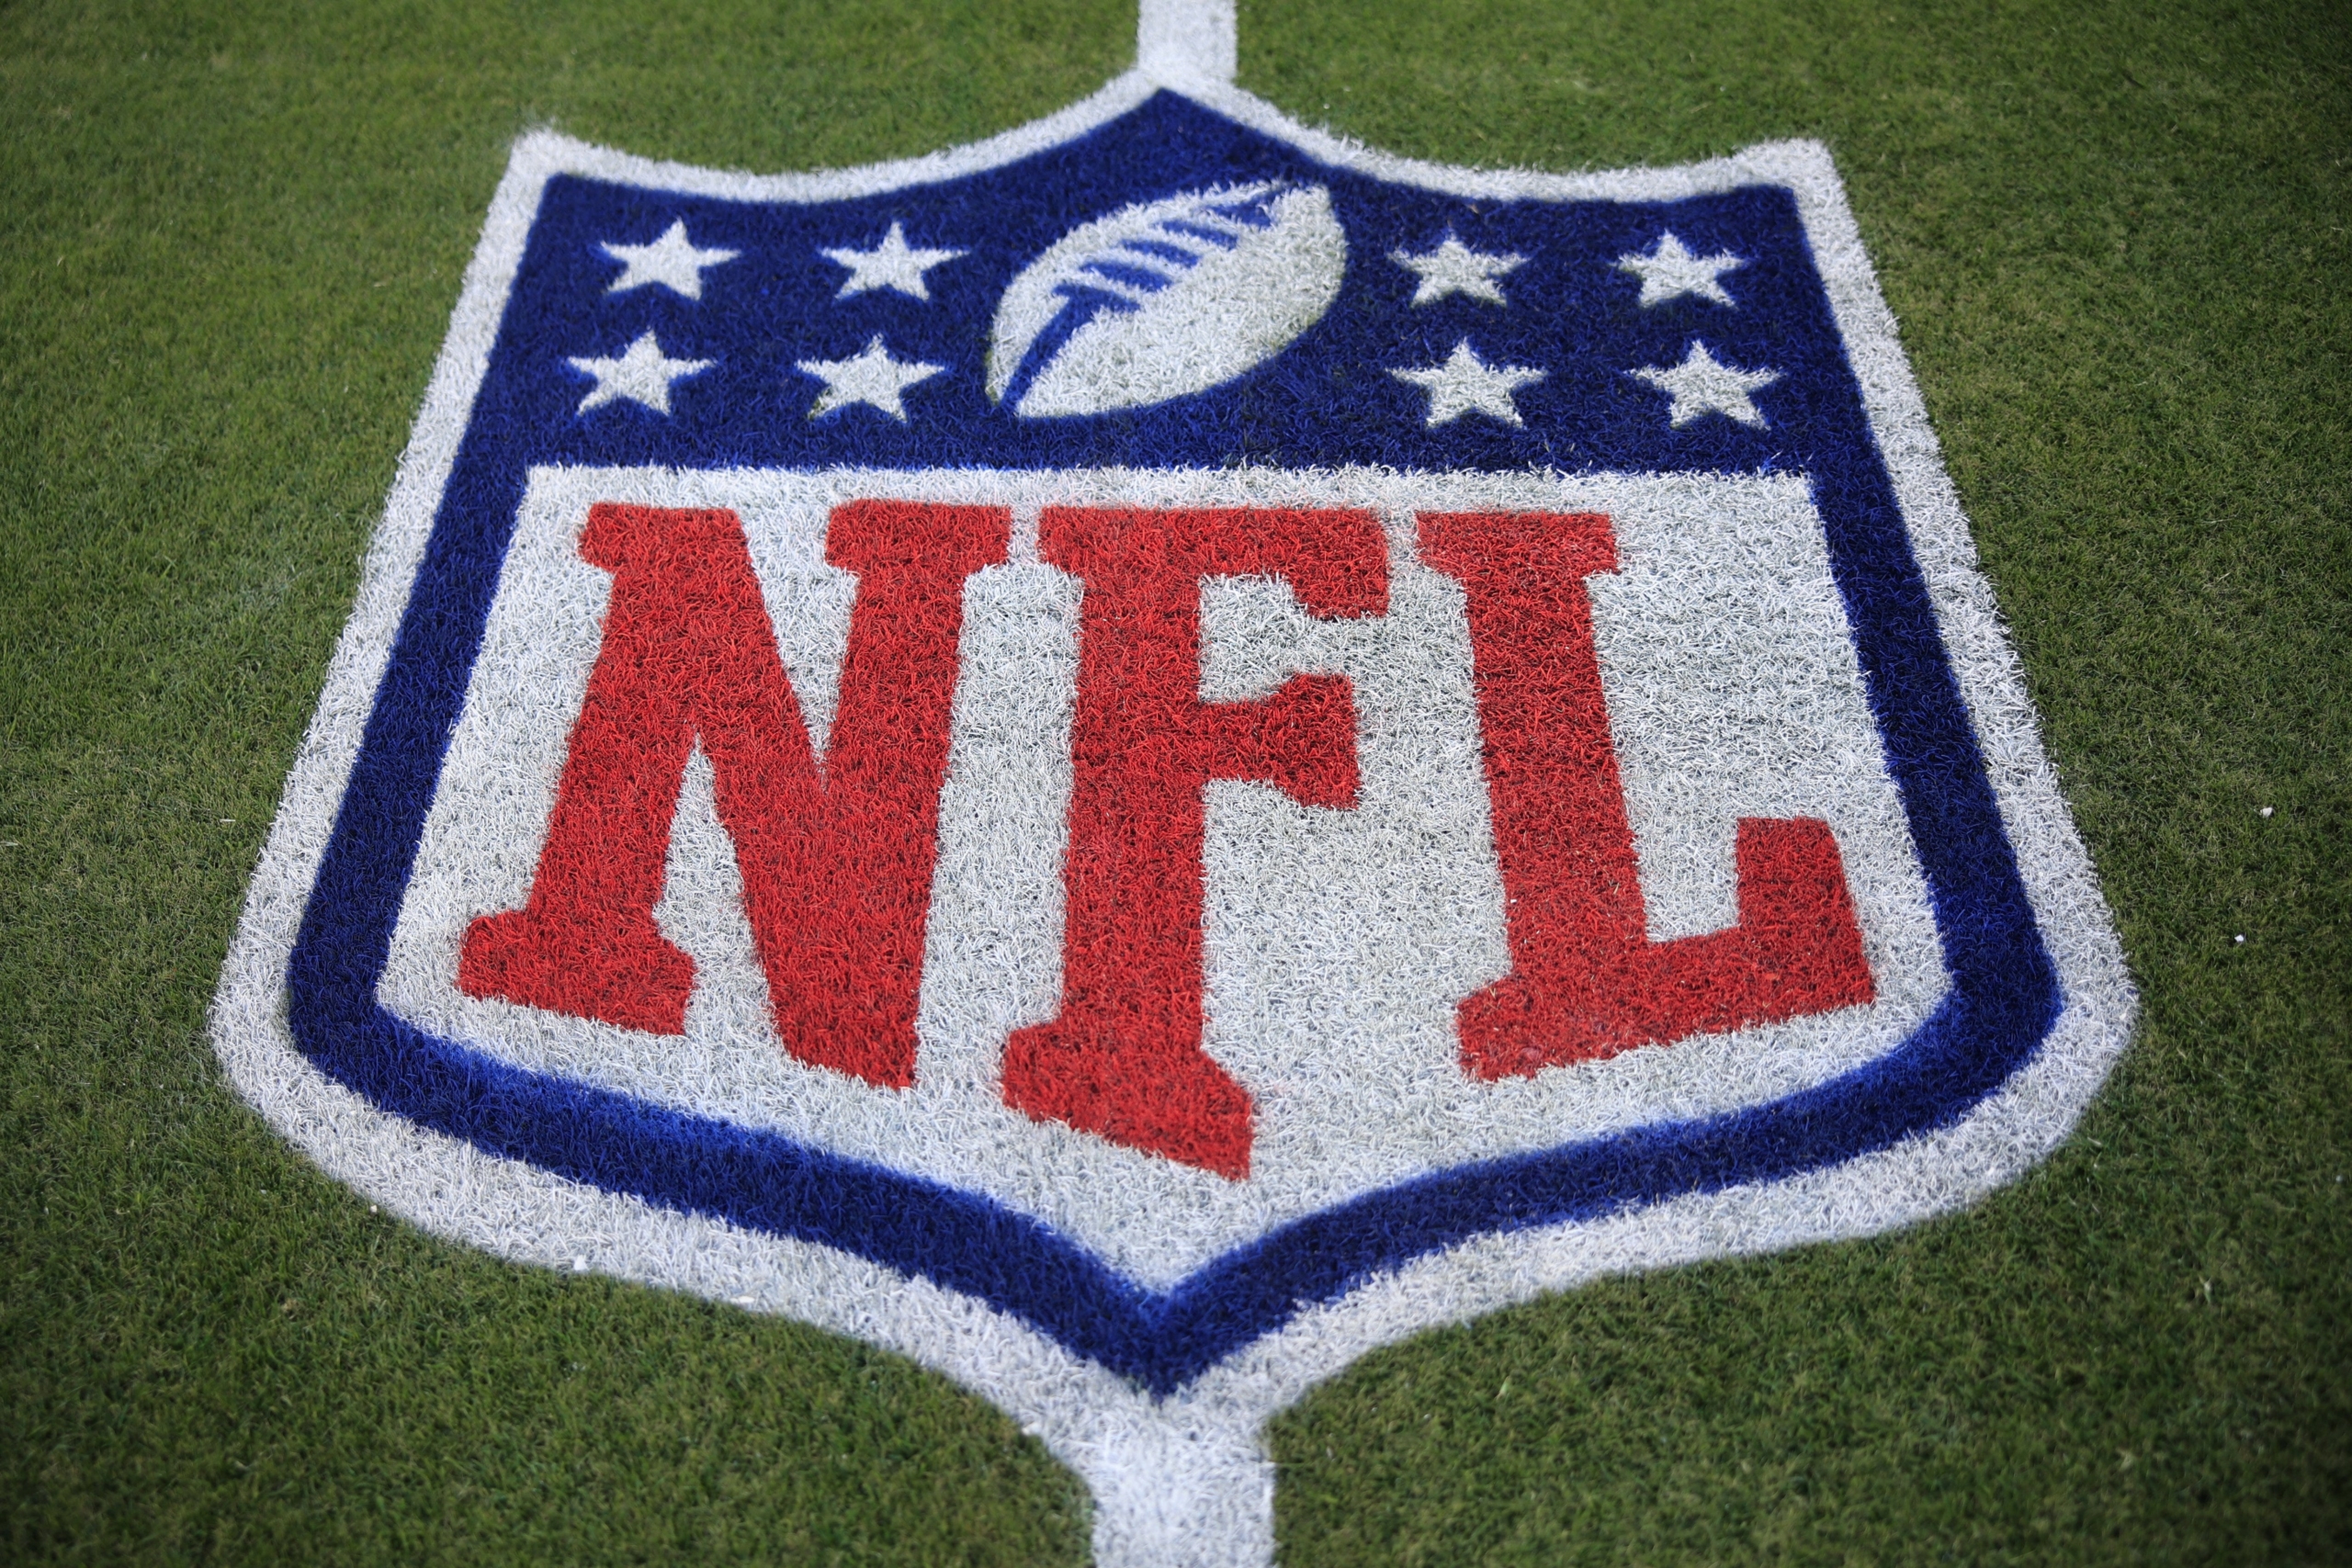 40 most-likely NFL salary cap casualties with updates on each move